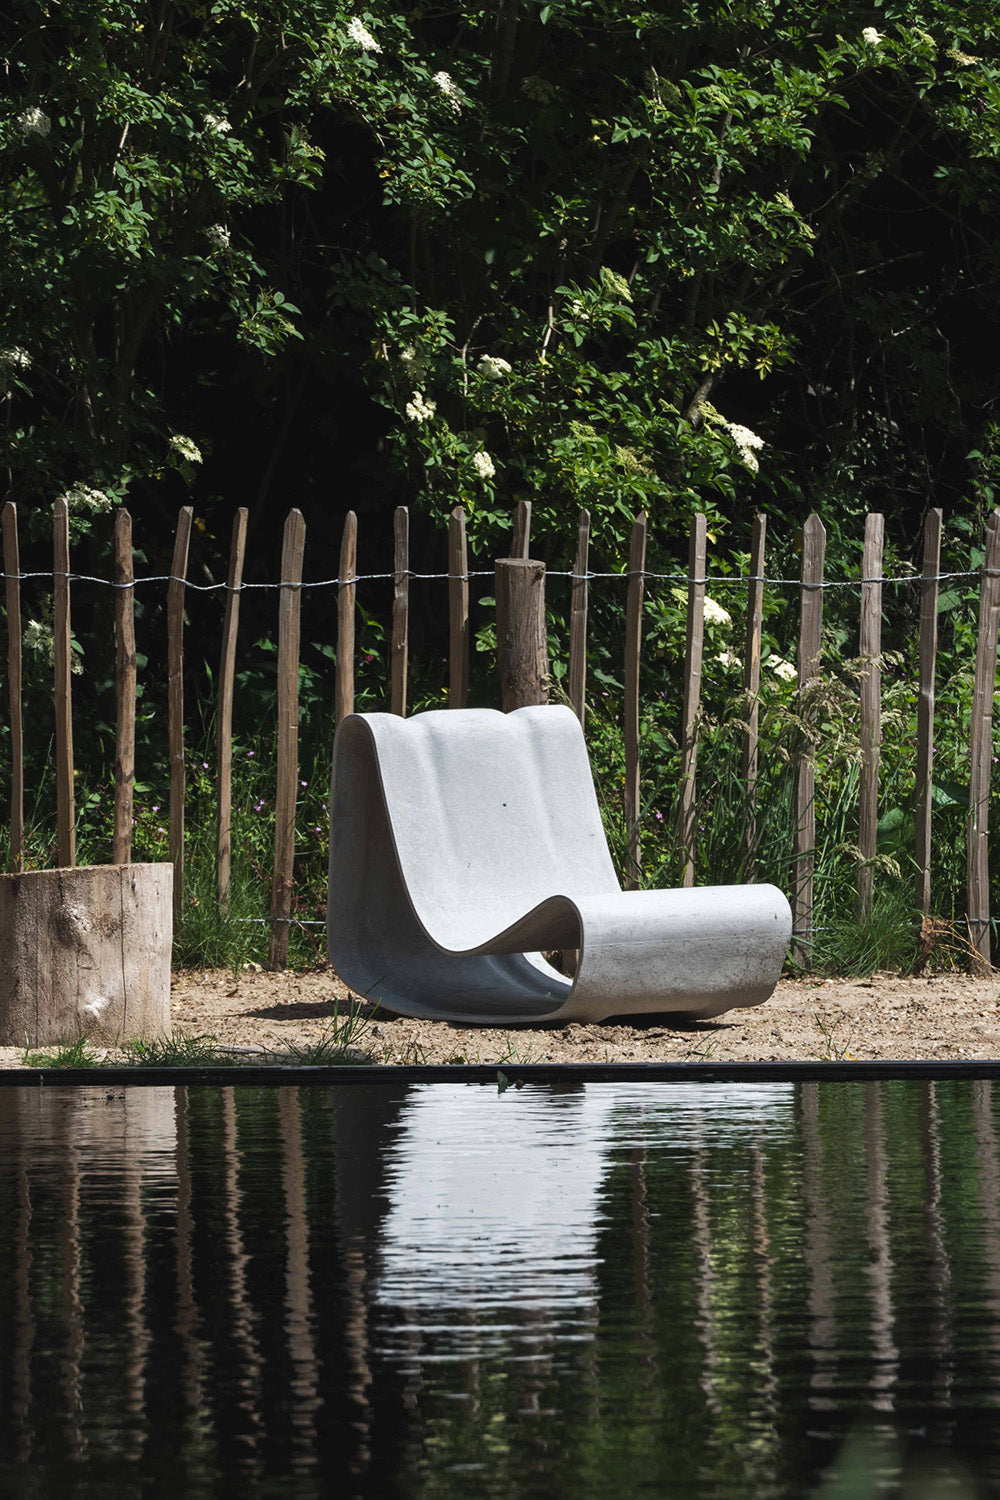 The Loop Chair by Willy Guhl seen at waterfront outside lounge area.